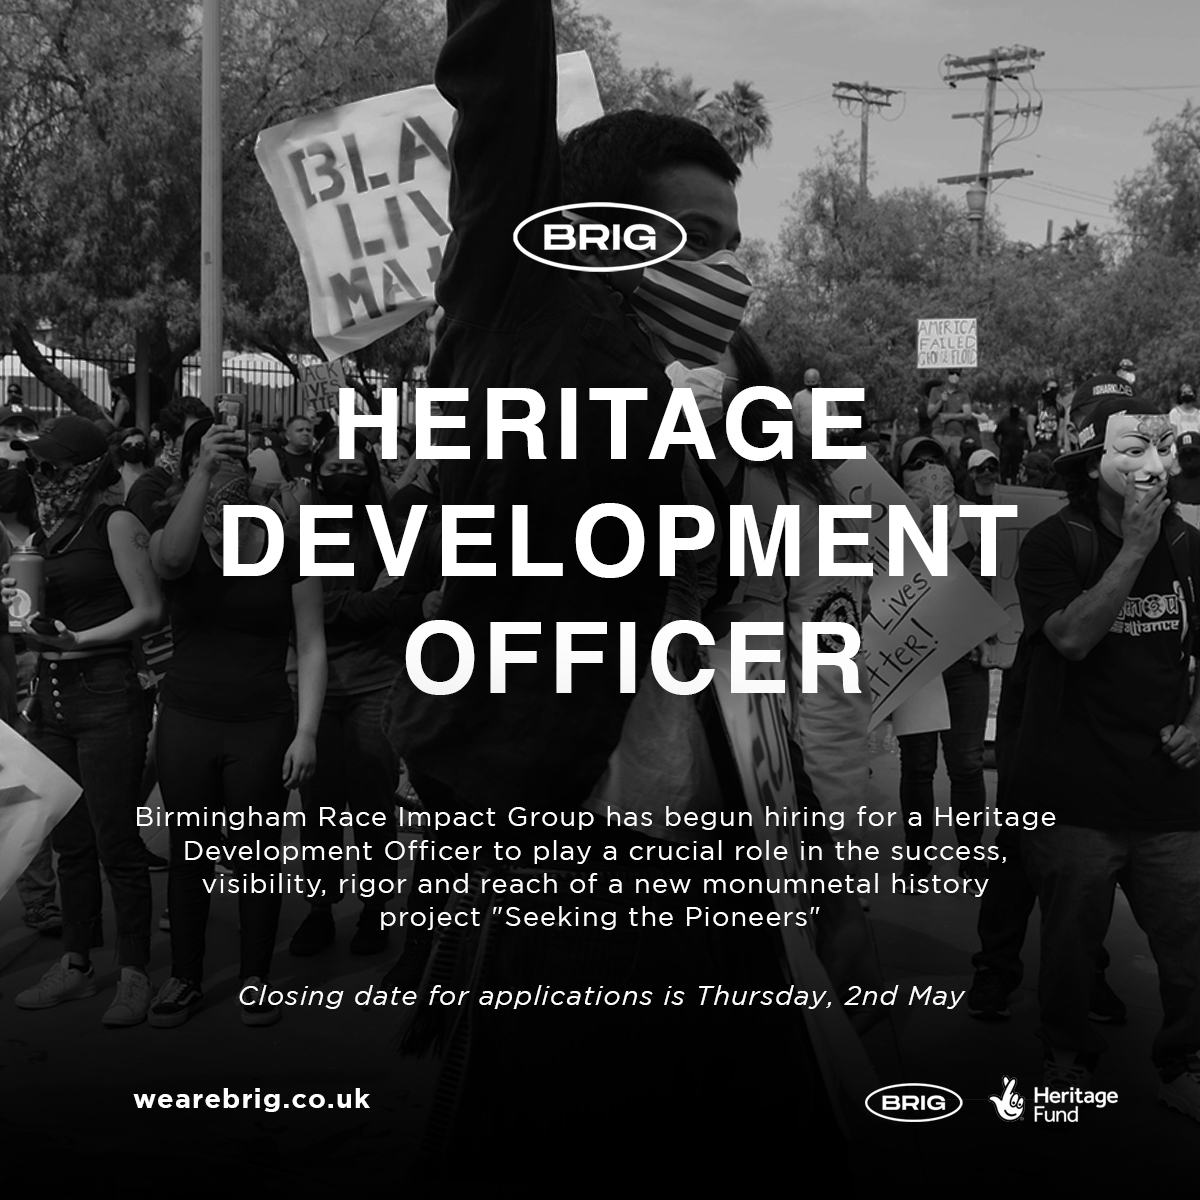 HIRING: We are looking for a HERITAGE DEVELOPMENT OFFICER to join the Birmingham Race Impact Group team Want to play a crucial role in the success, visibility and reach of a new history project 'Seeking the Pioneers'? Find out more information: wearebrig.co.uk/news/seeking-t…